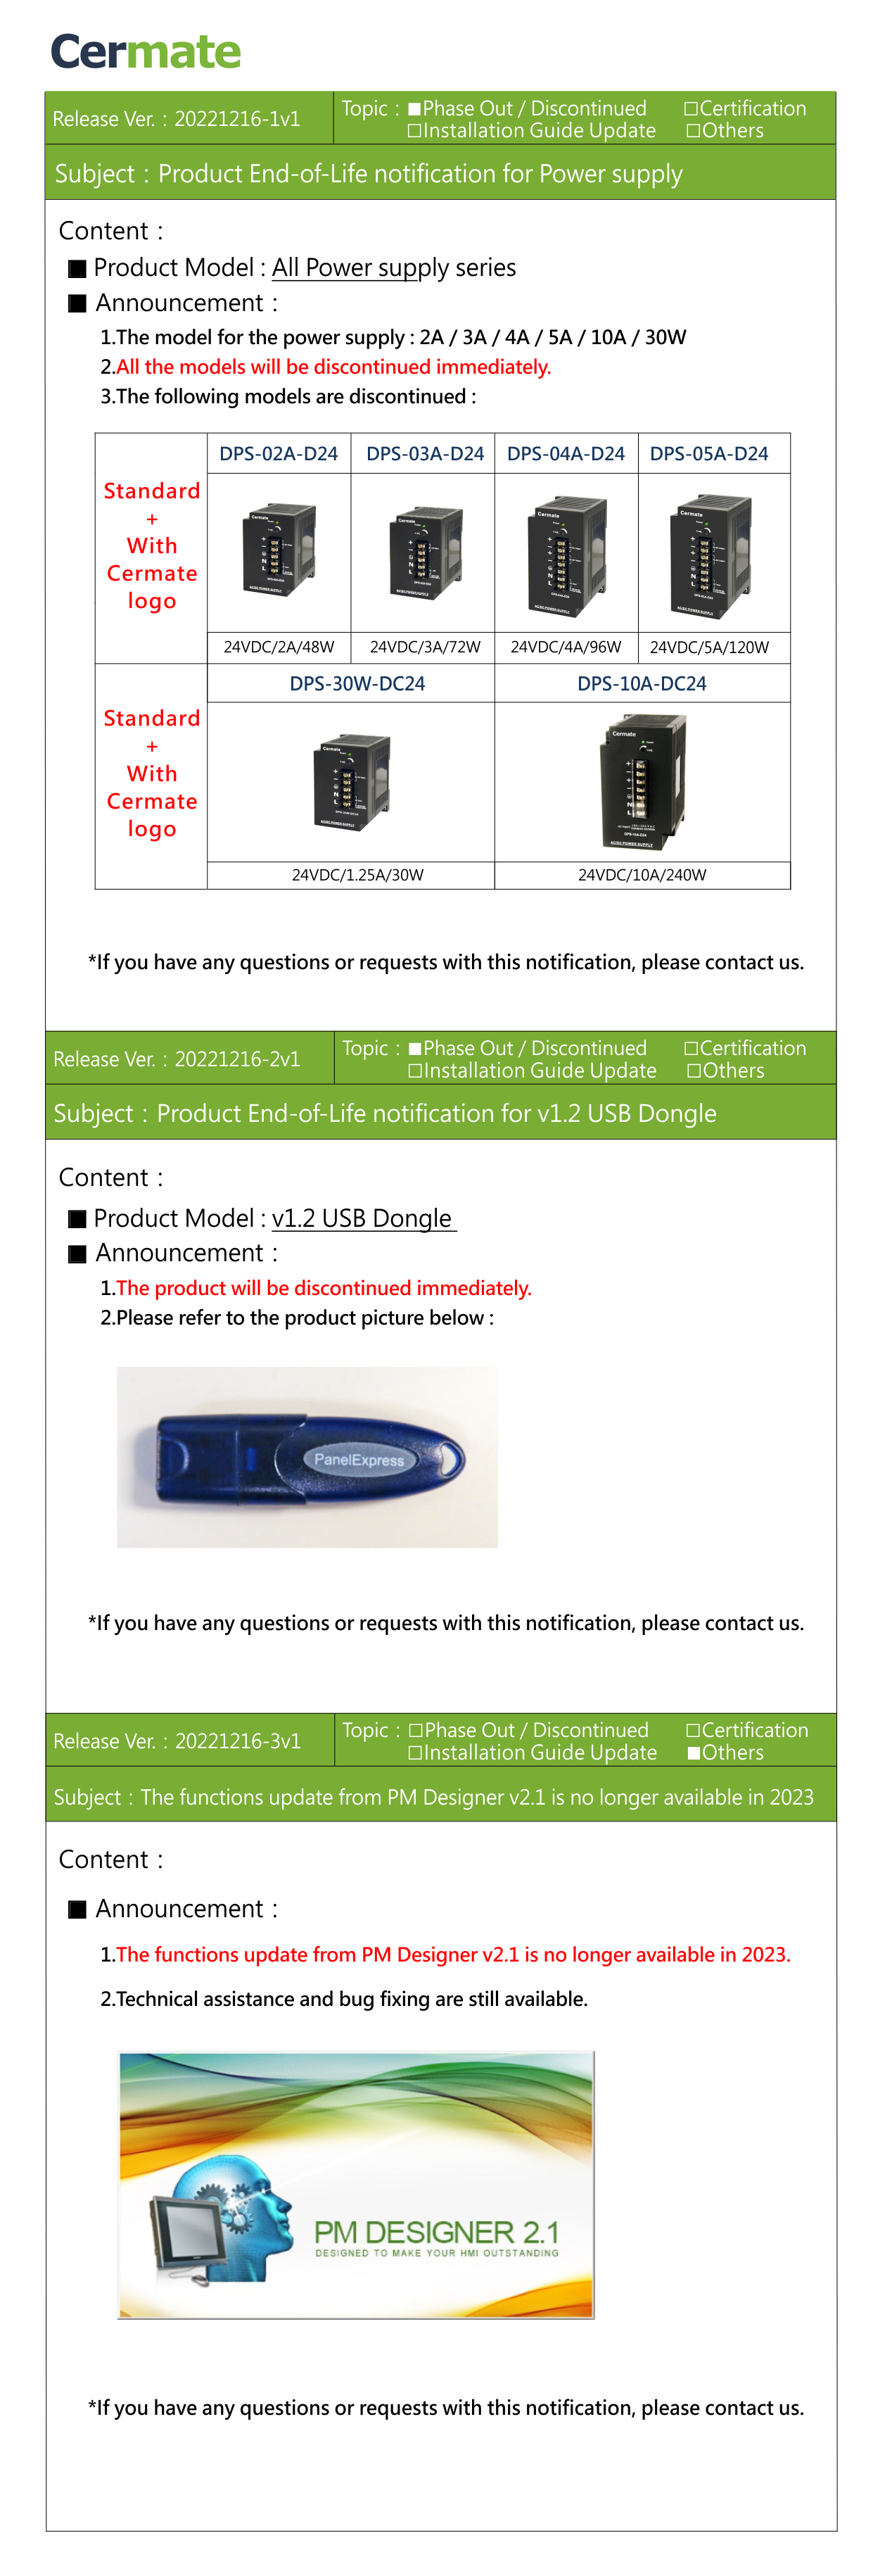 20221216_Product End-of-Life Notification for PS/USB dongle_pm21 updates is unavailable in 2023